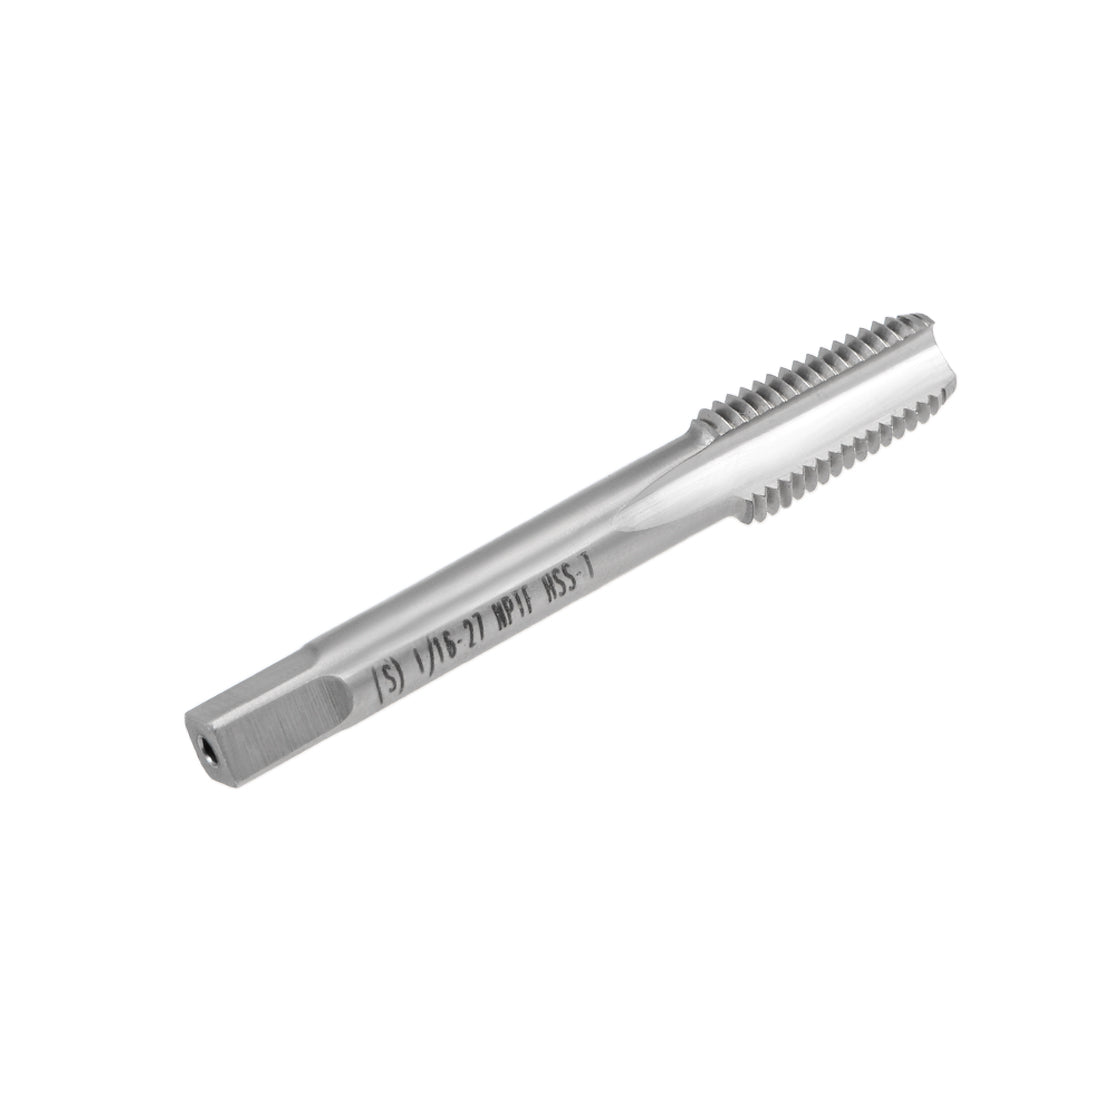 Uxcell Uxcell Machine Tap 1/16-27 NPTF Straight Pipe Thread 3 Flutes High Speed Steel